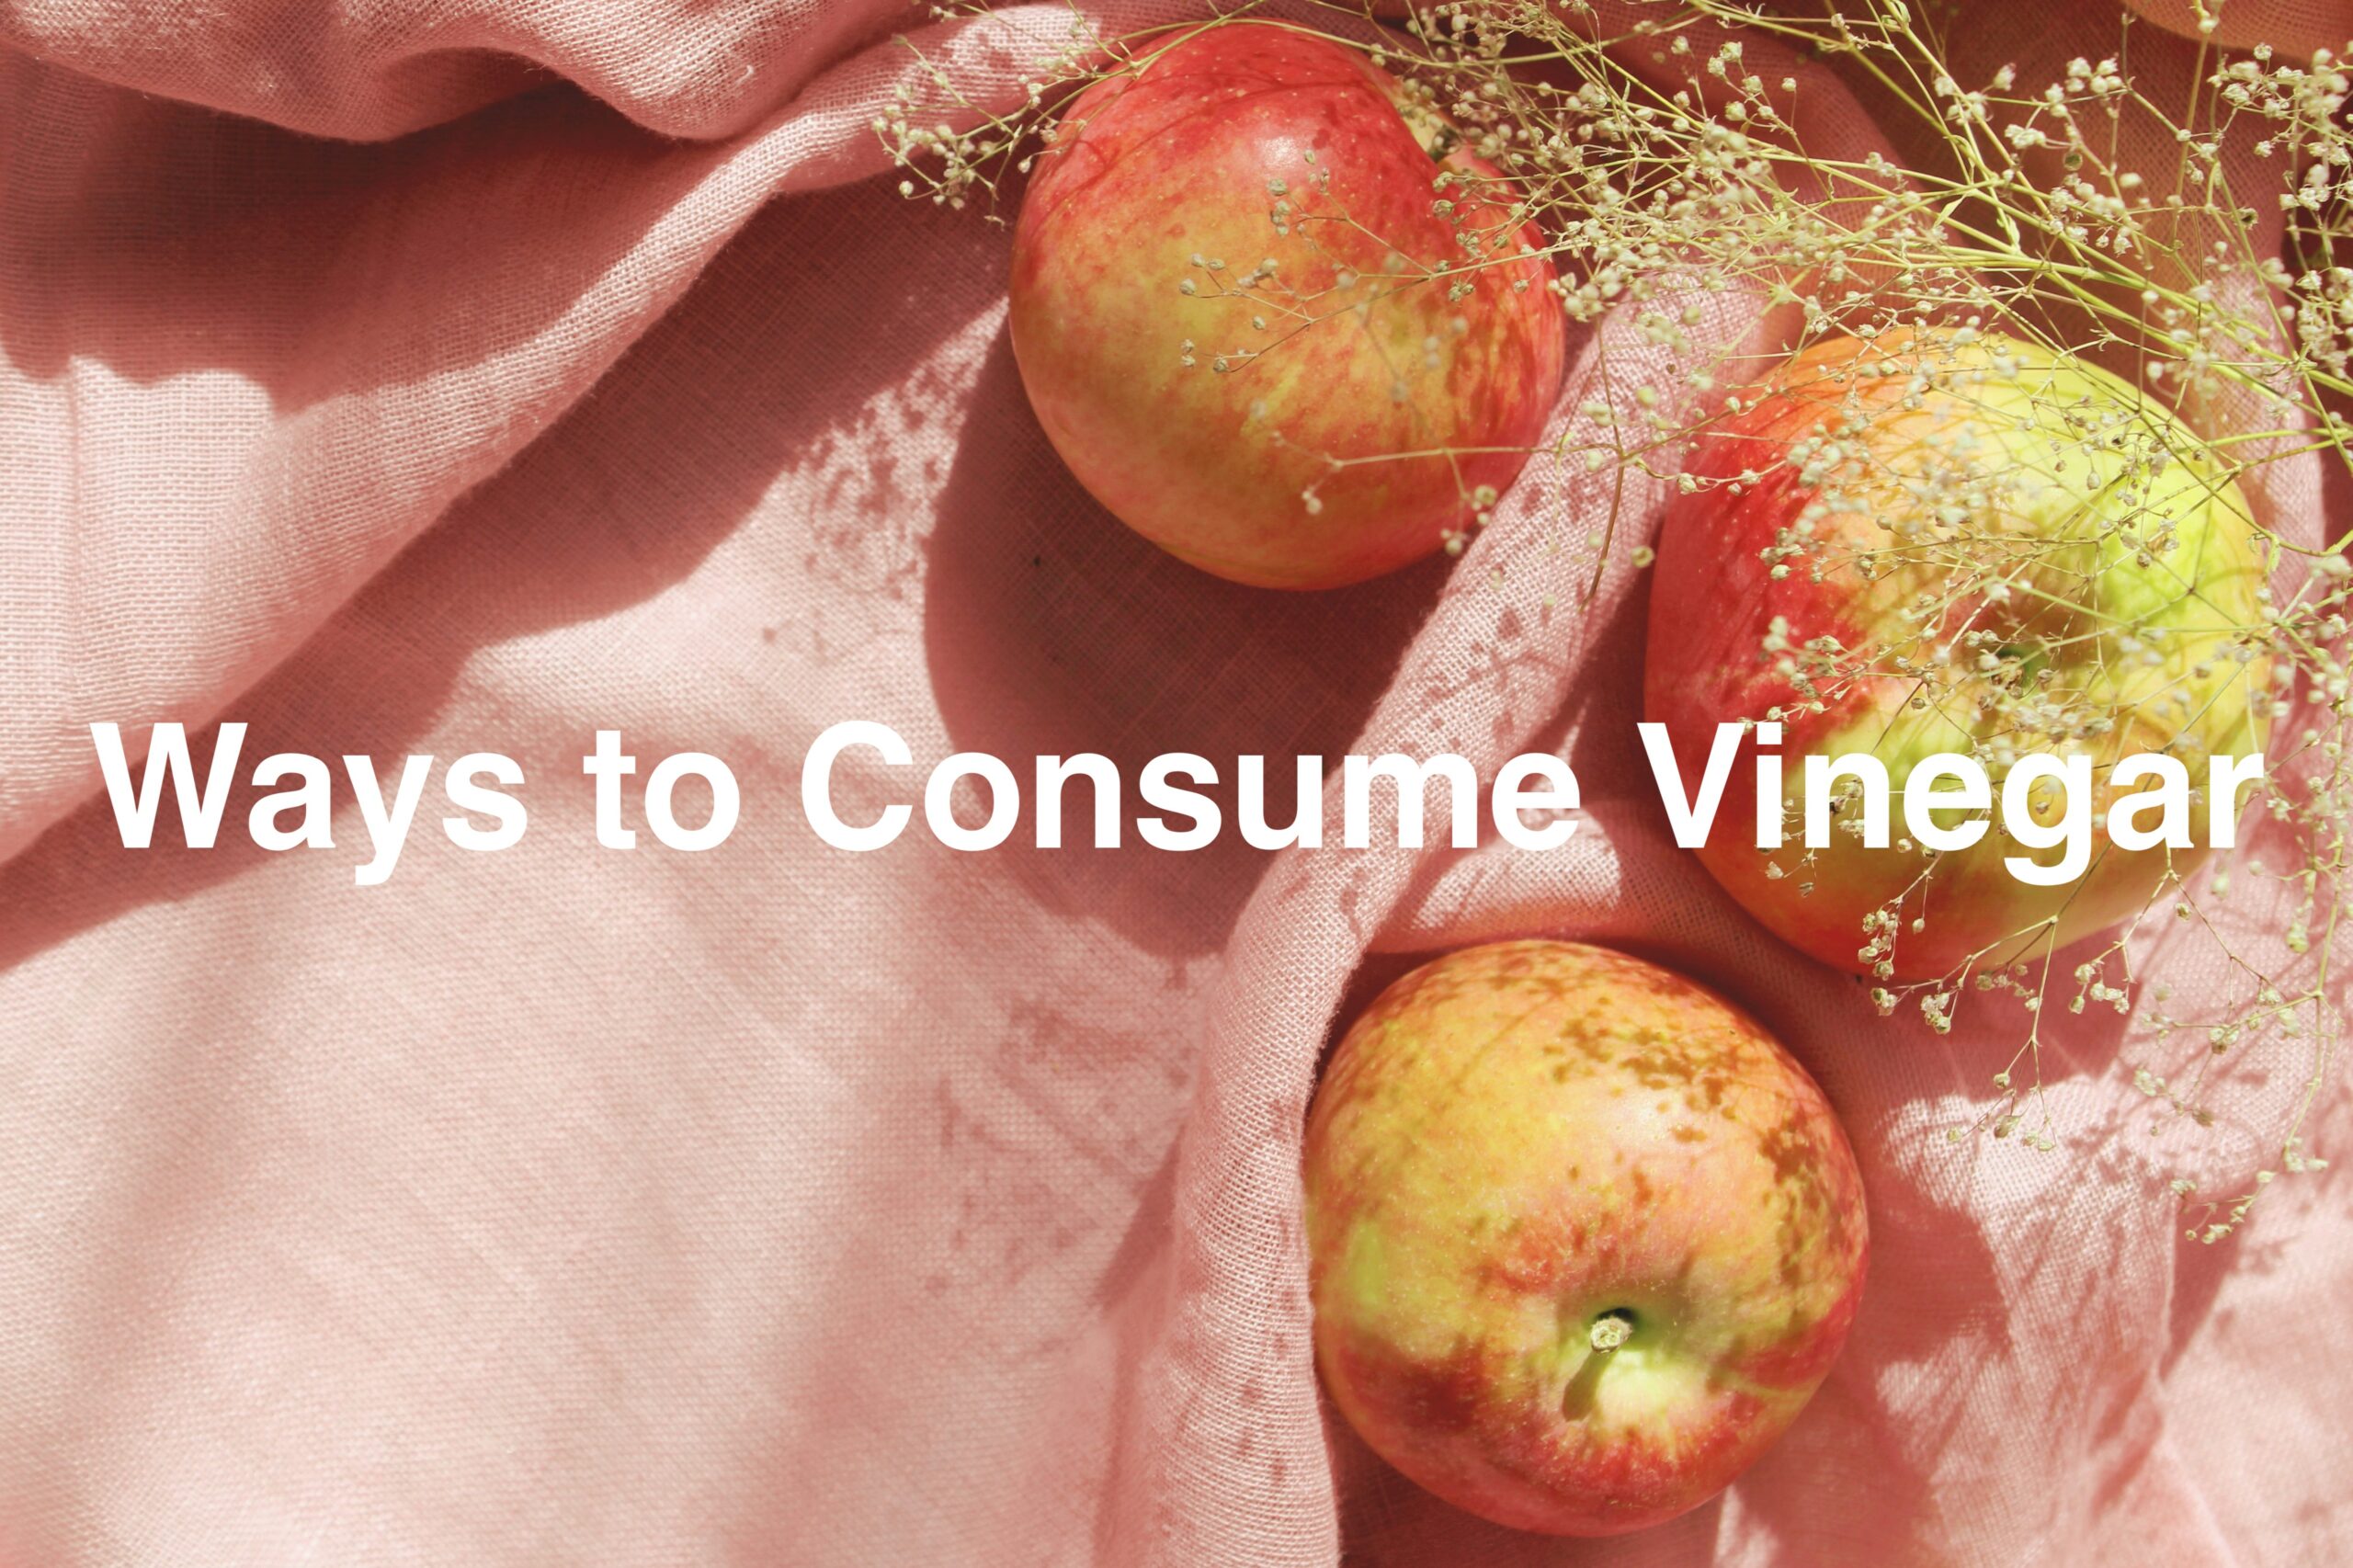 pic of apples on a pink tea towel with the title above: Way to consume Vinegar